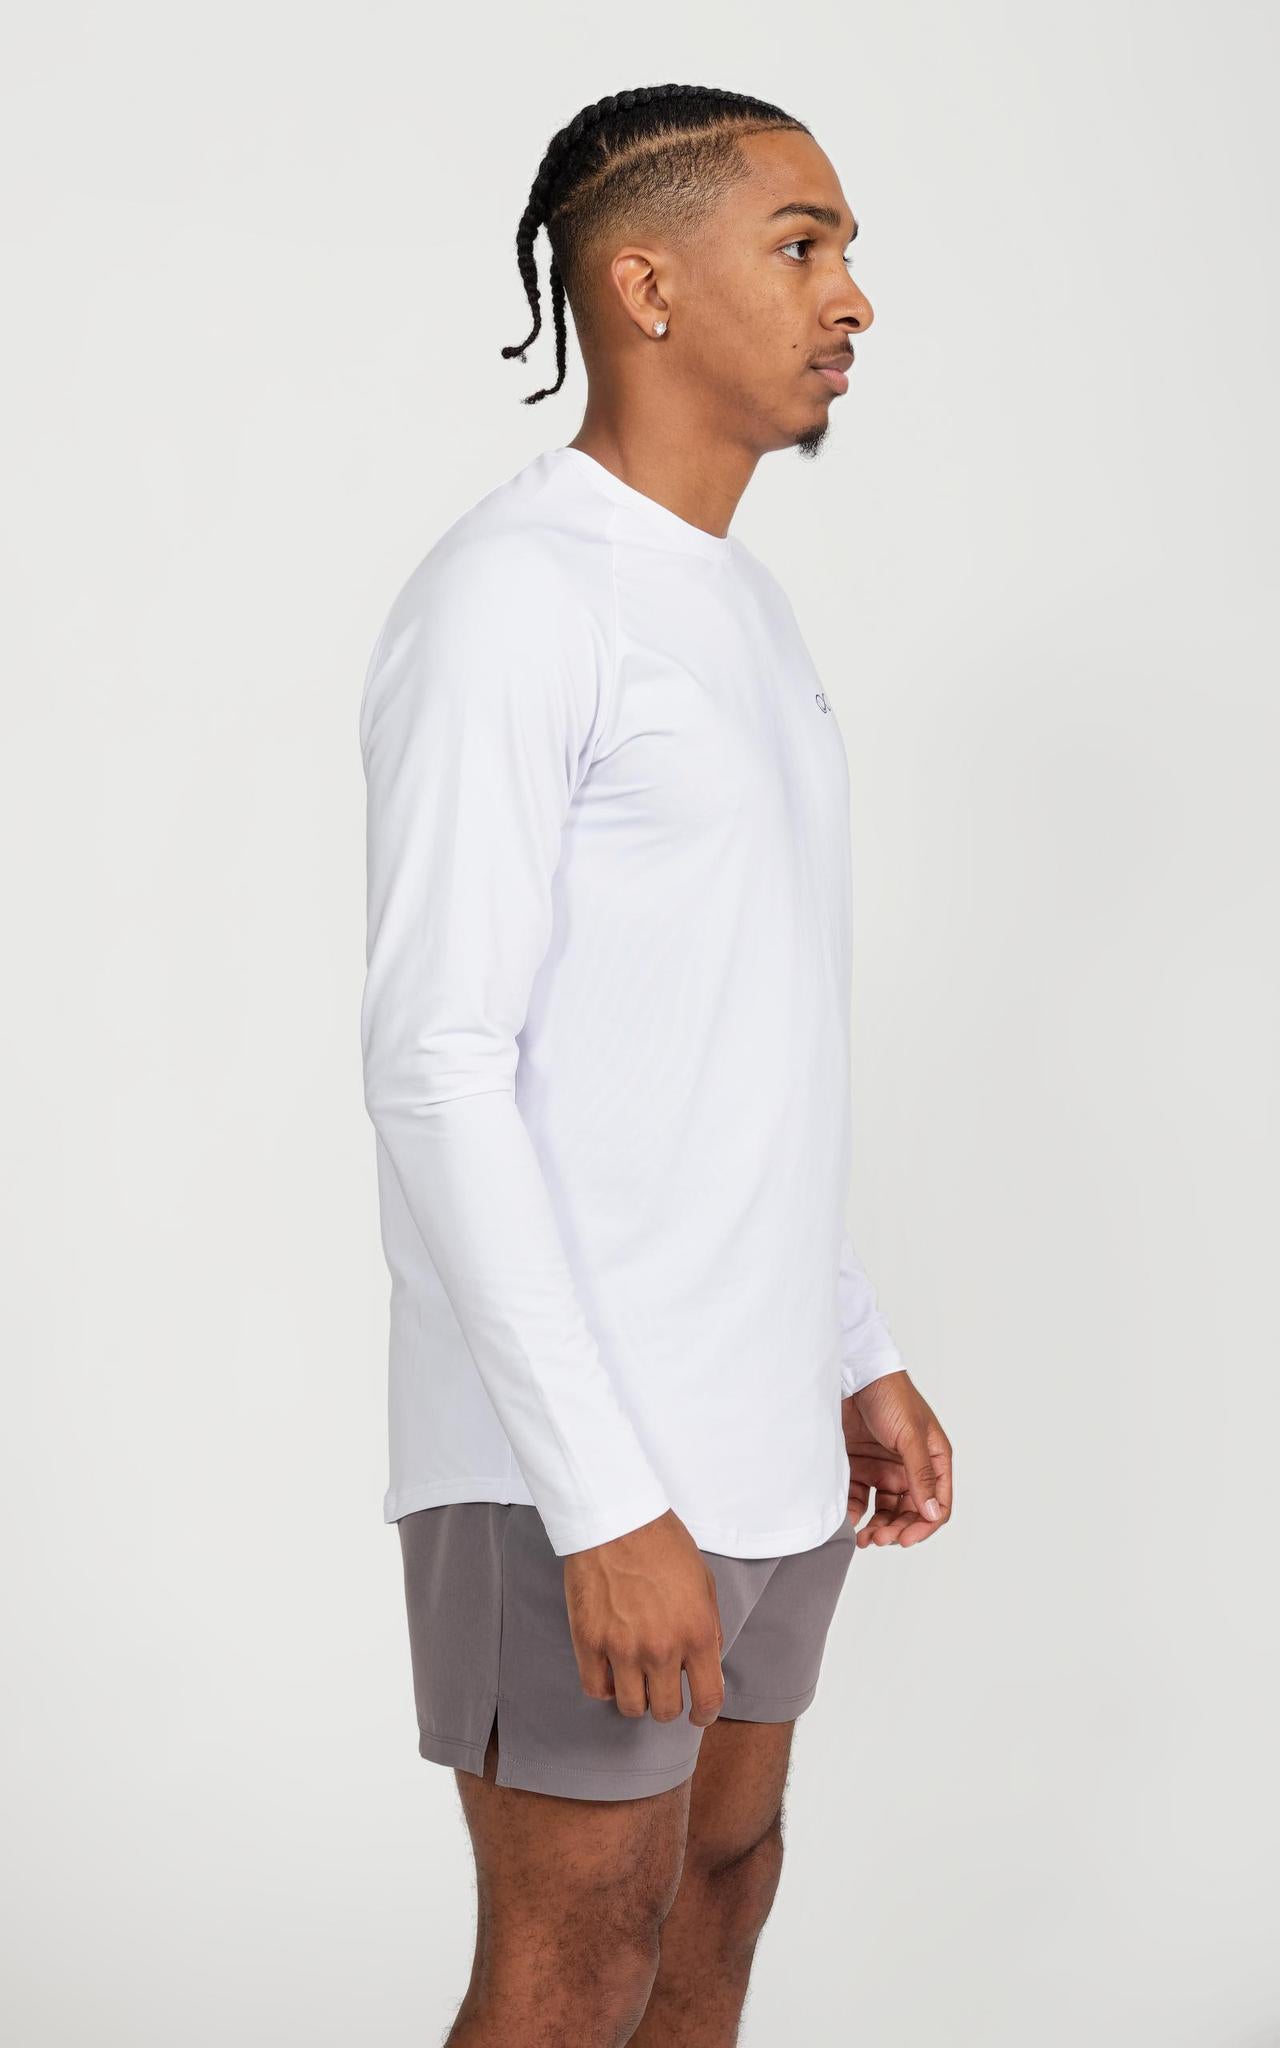 Long Sleeve Performance Cooling Shirt UPF 50 in White – Southern